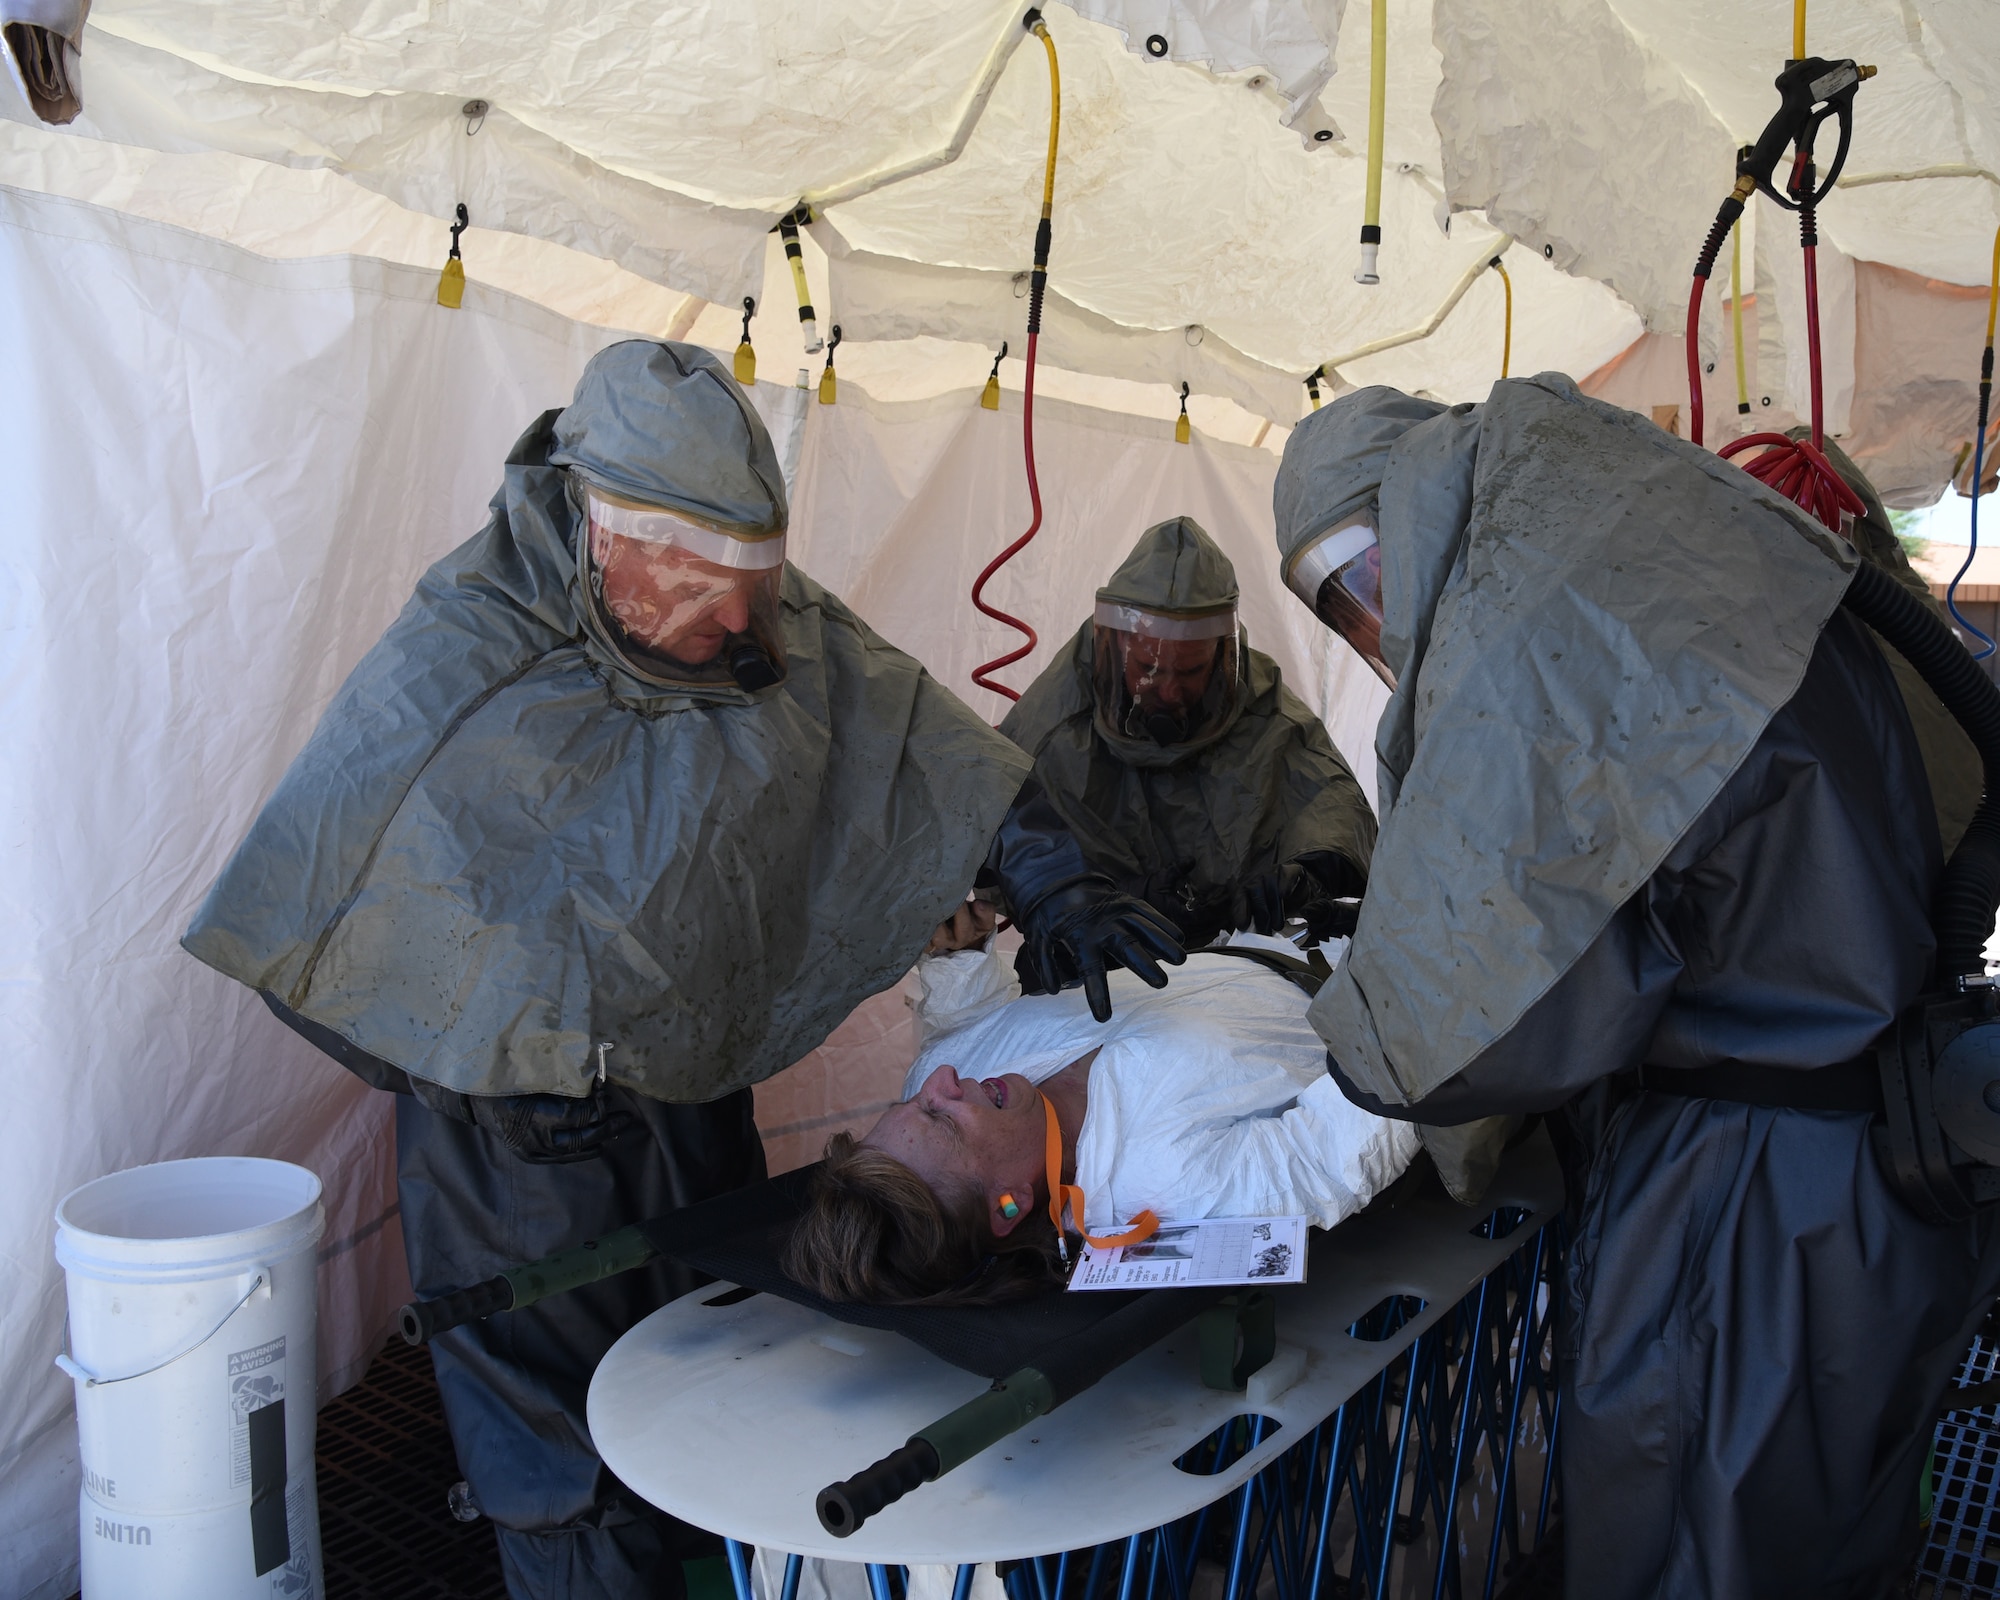 through an In-Place Patient Decontamination station during an exercise at the Goldwater Air National Guard Base, May 22. The purpose of the exercise was to train and evaluate the IPPD team's ability to decontaminate and prepare a patient to be transported onto a higher level of medical care. (U.S. National Guard photo by Staff Sgt. Wes Parrell)